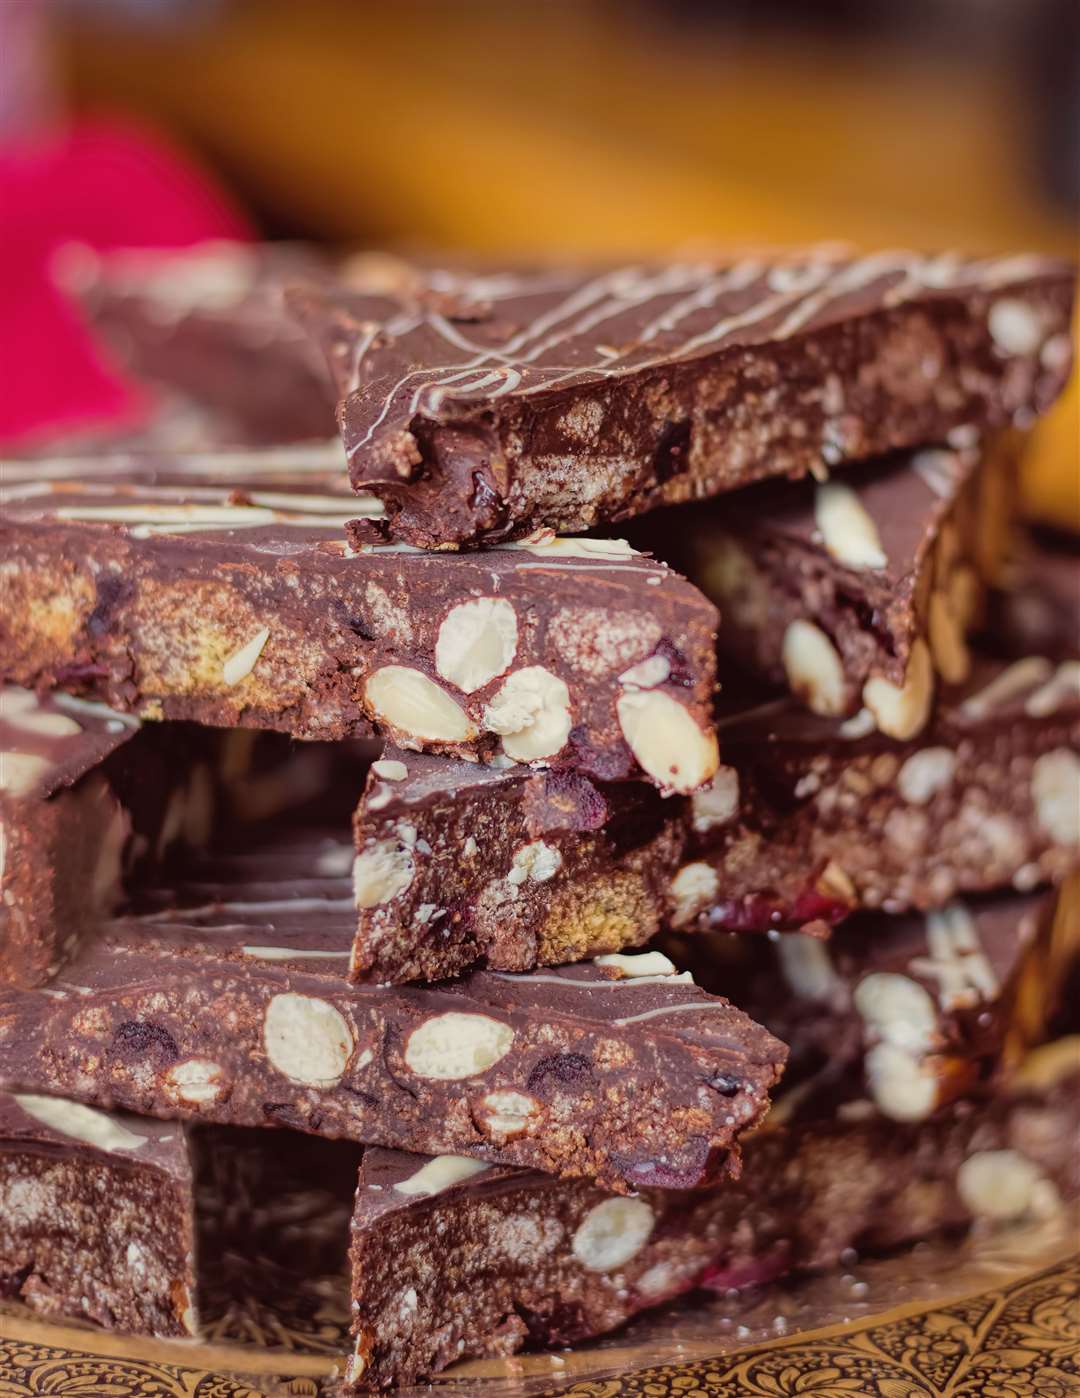 Chocolate tiffin is a great choice – and fun to make!